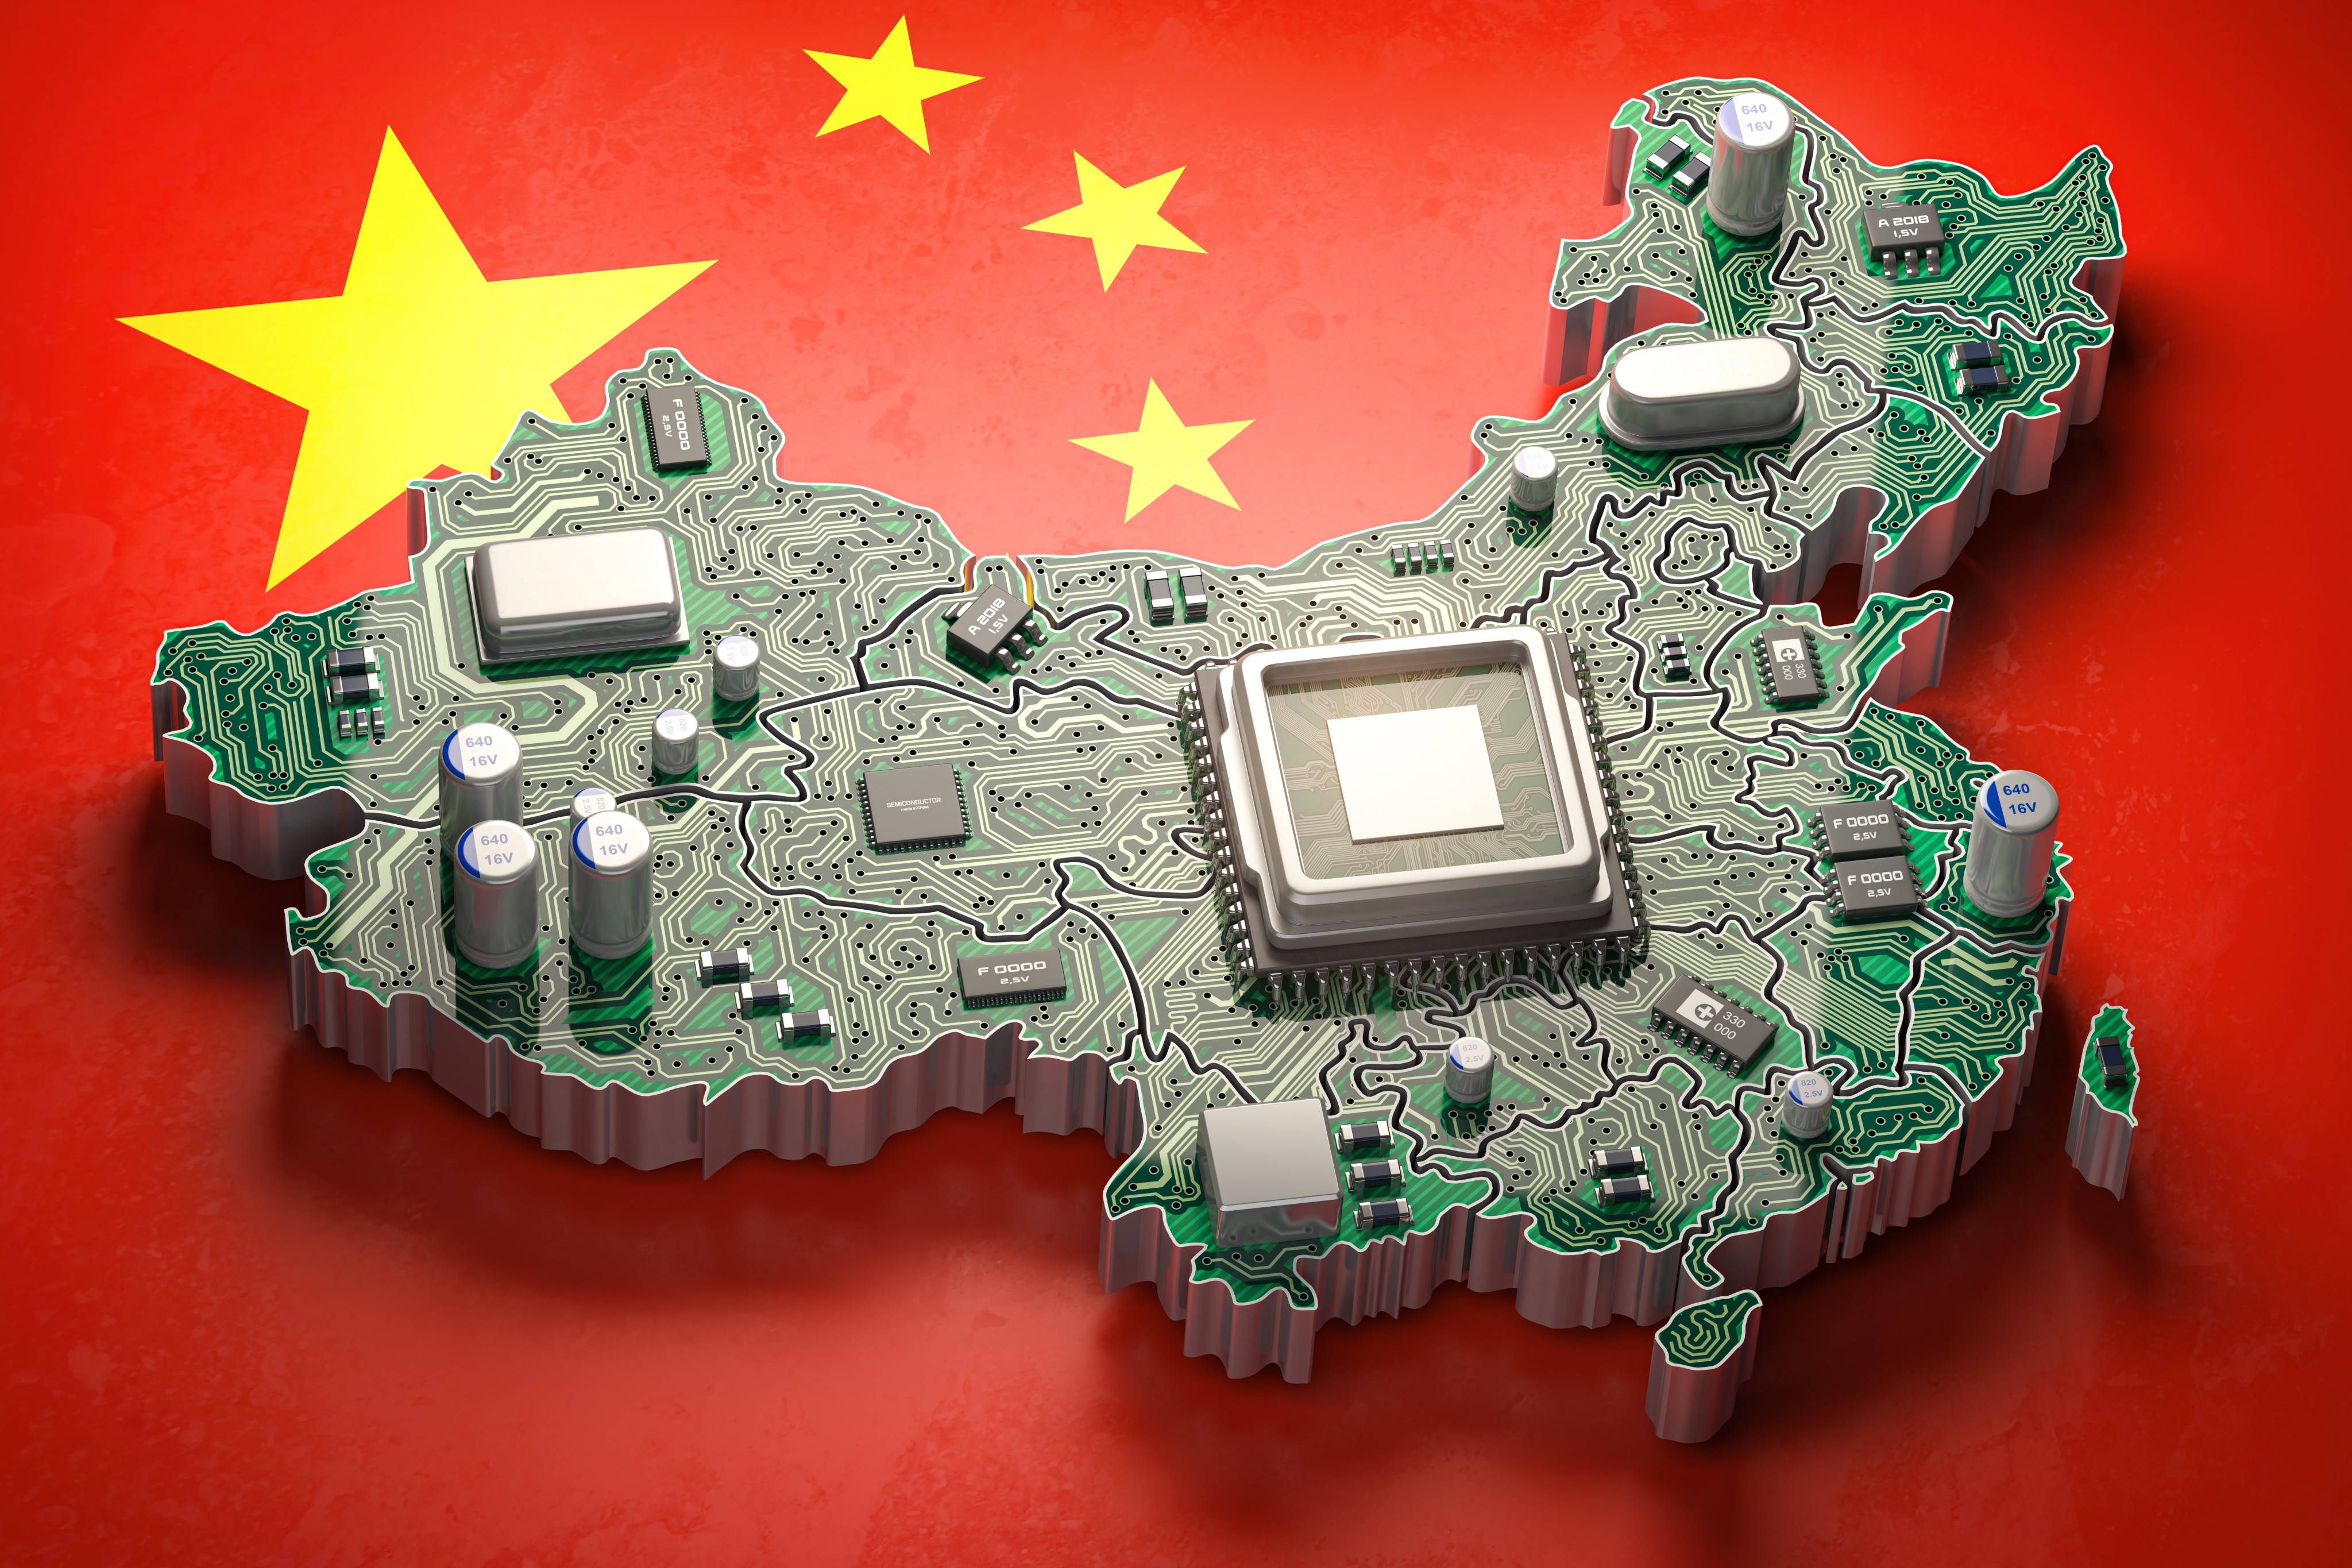 US venture capitalists are getting locked out of sensitive industries such as semiconductors amid rising scrutiny of the cross-border deals. Photo: Shutterstock